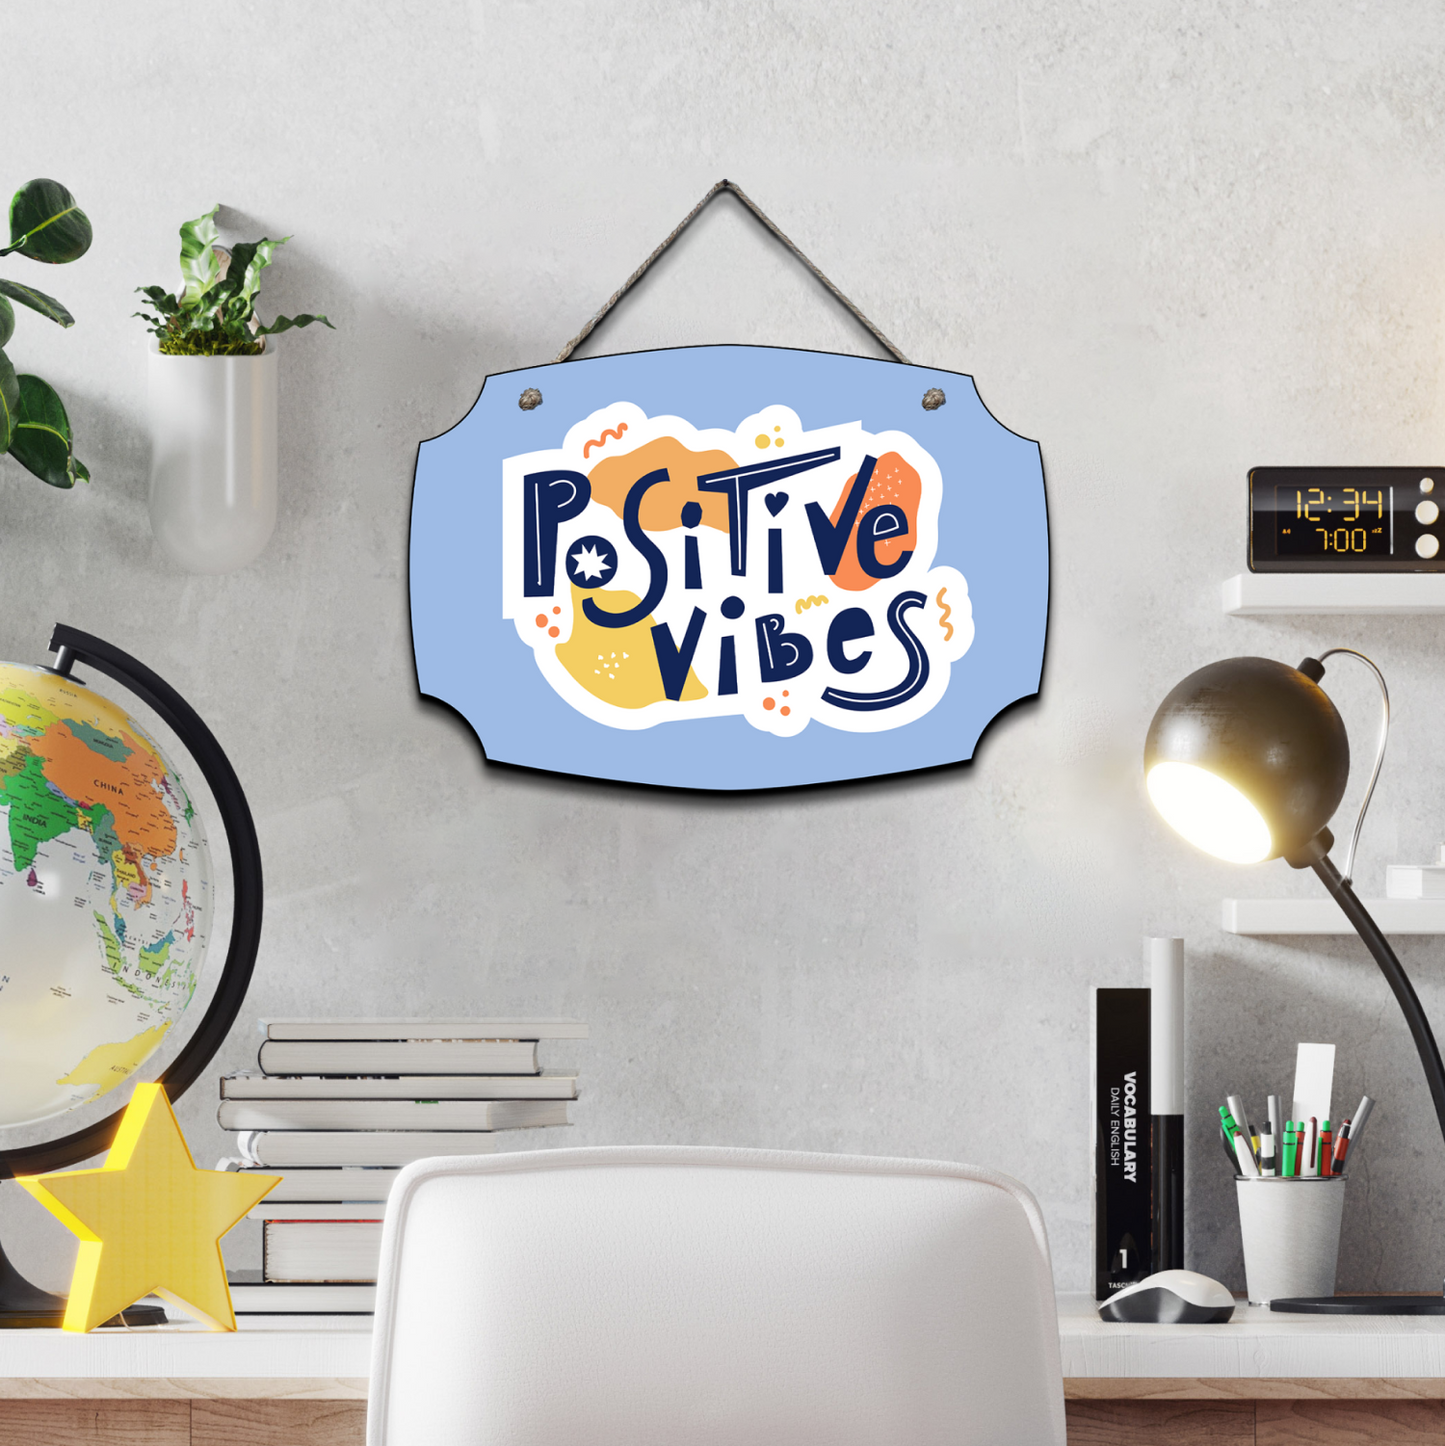 Positive Vibes Wood Print Colorful Wall or Door Hanging